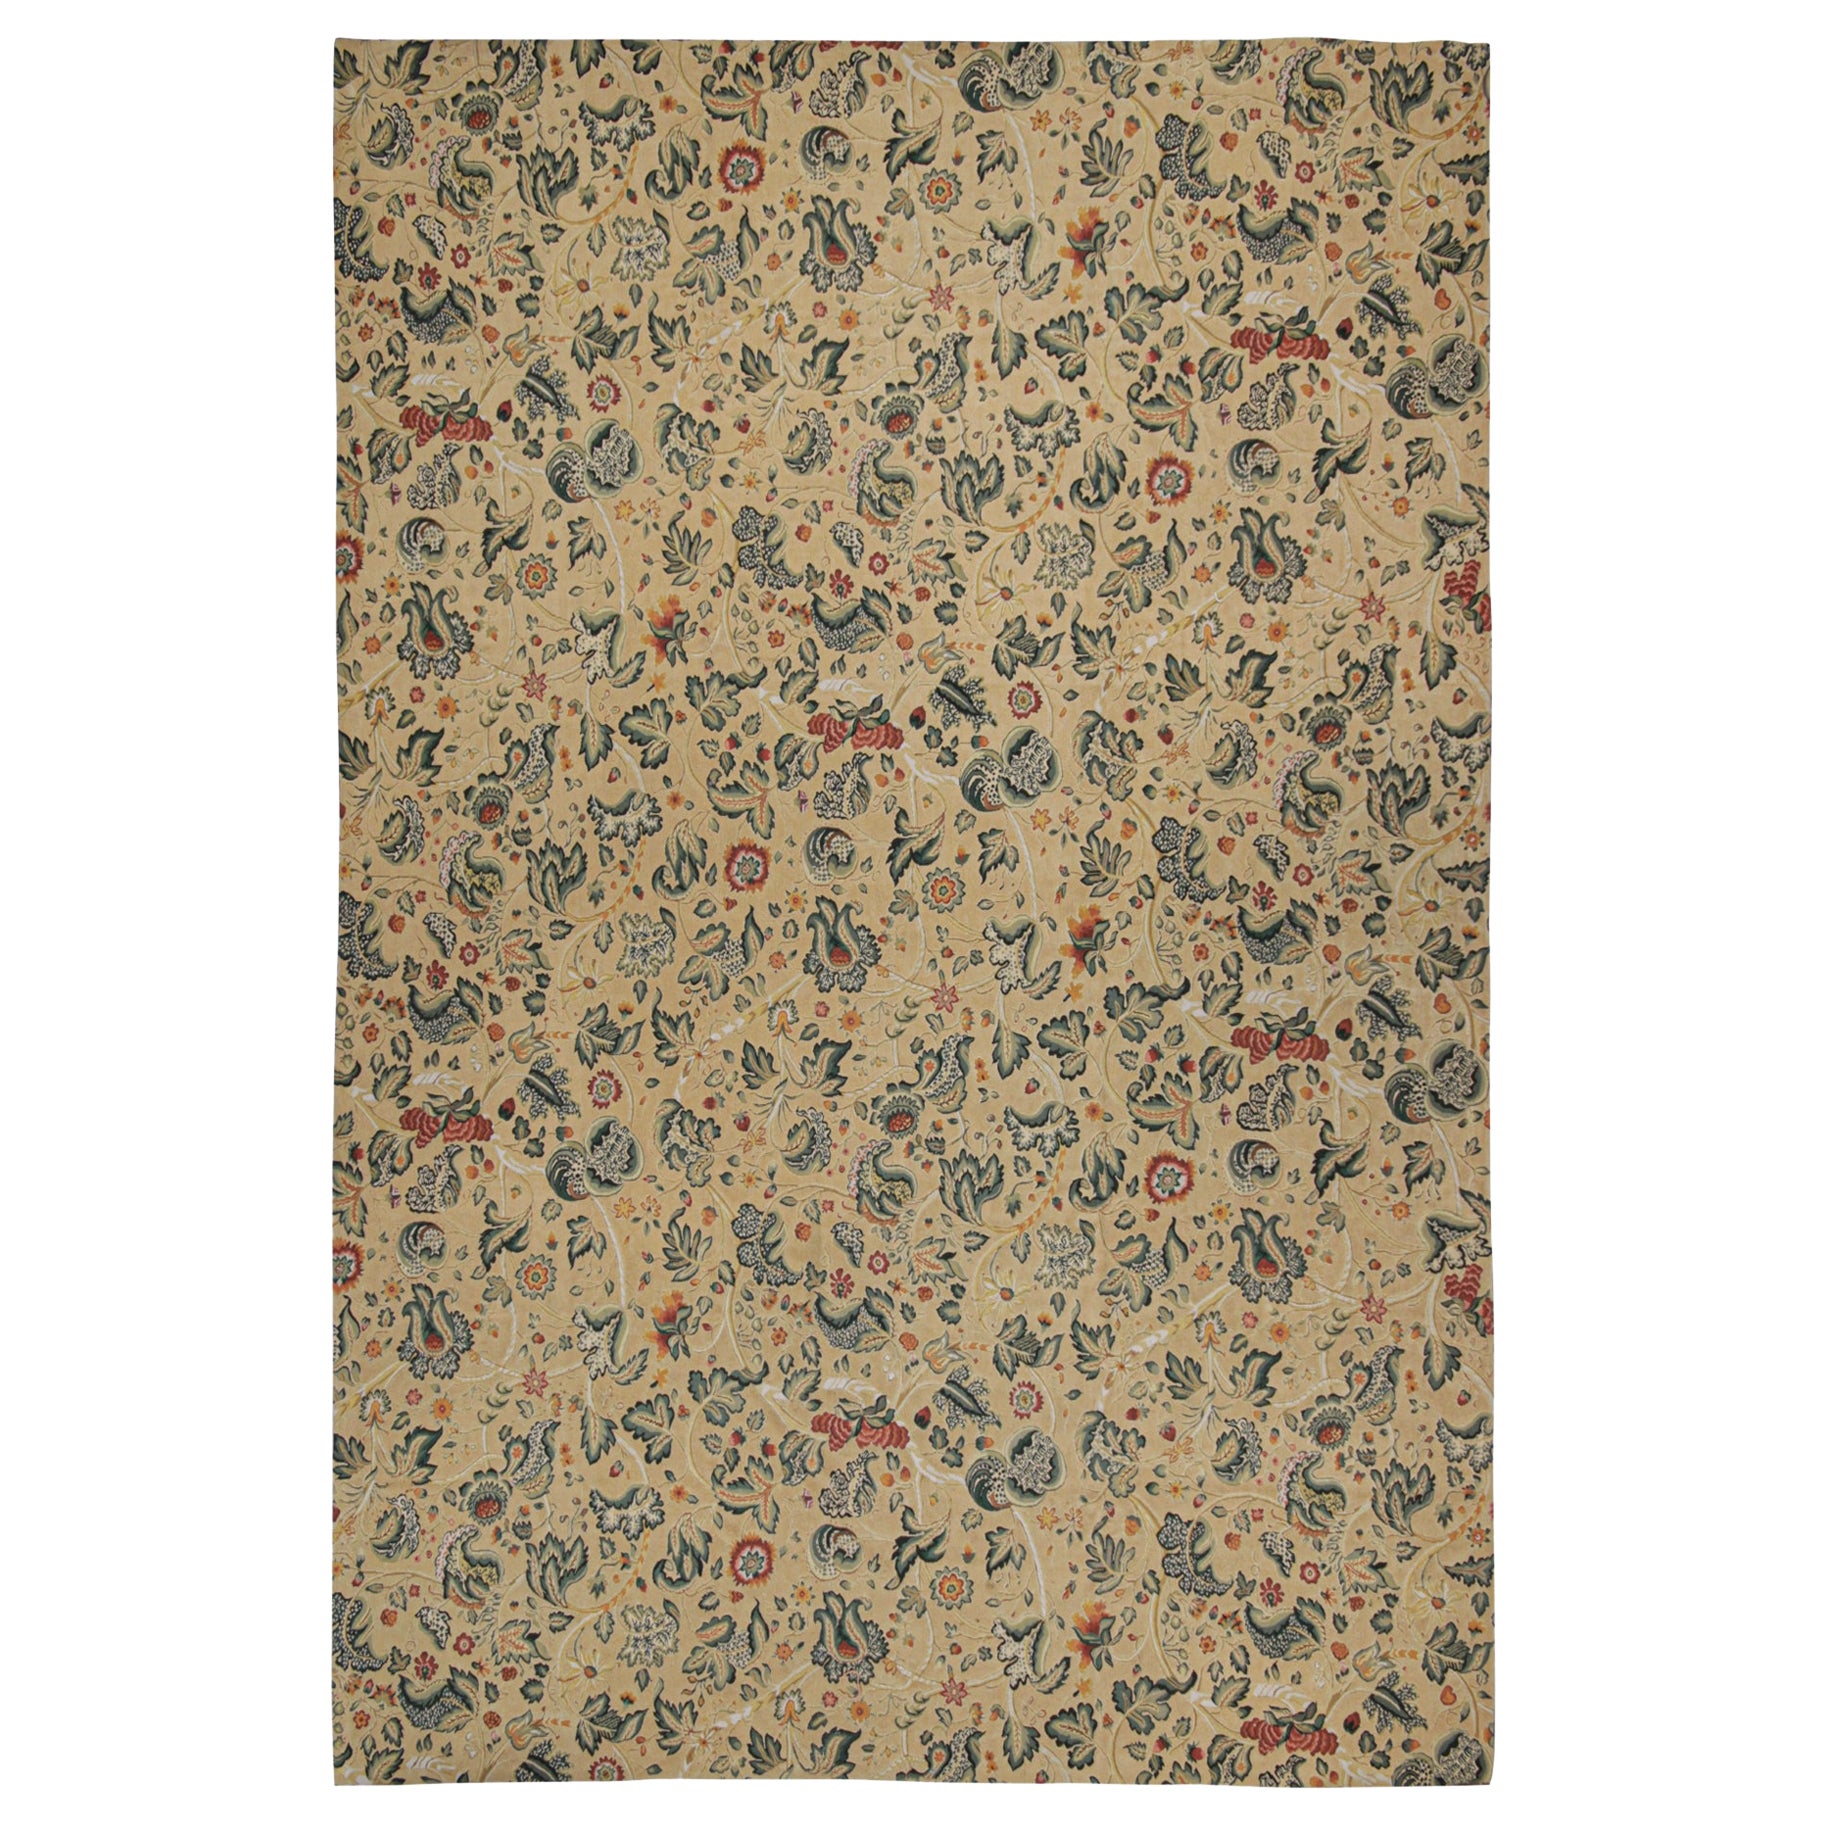 Rug & Kilim’s European Tudor Style Flatweave in Beige with Teal Floral Pattern For Sale